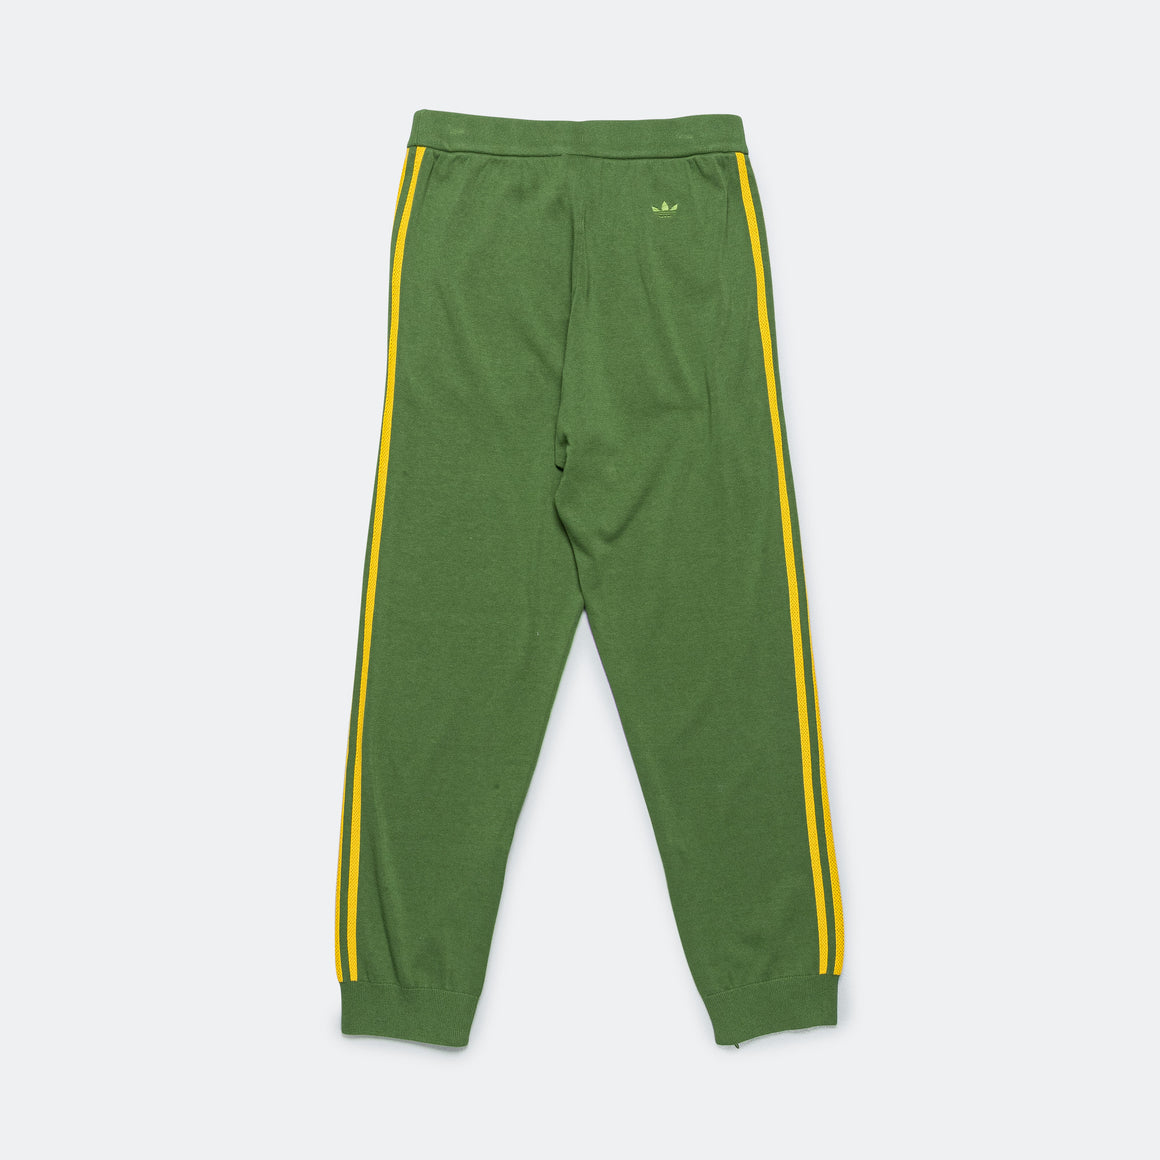 adidas - Knit Track Pant x Wales Bonner - Crew Green - UP THERE